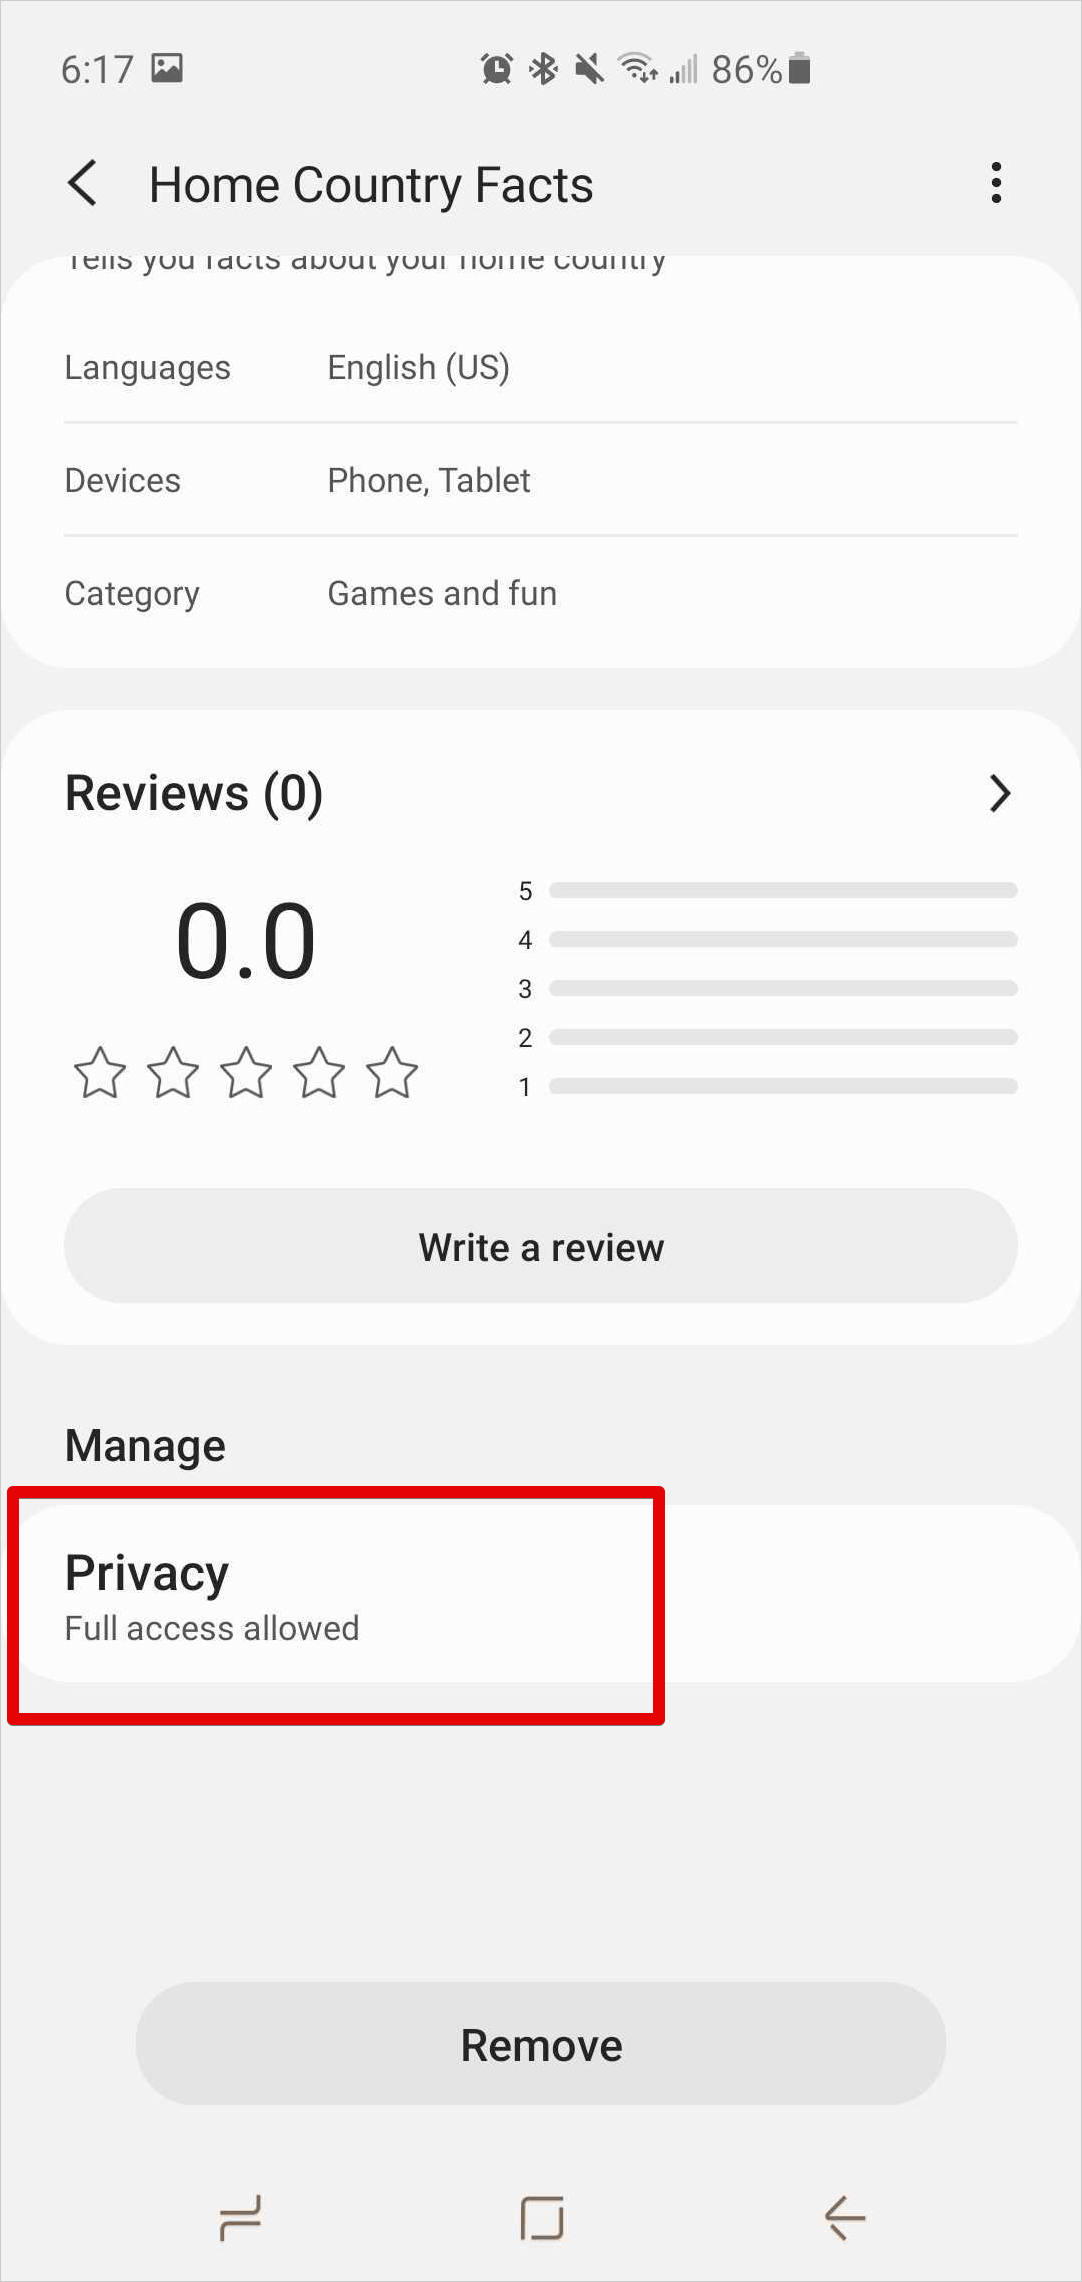 The Manage Privacy option on the capsule's home page